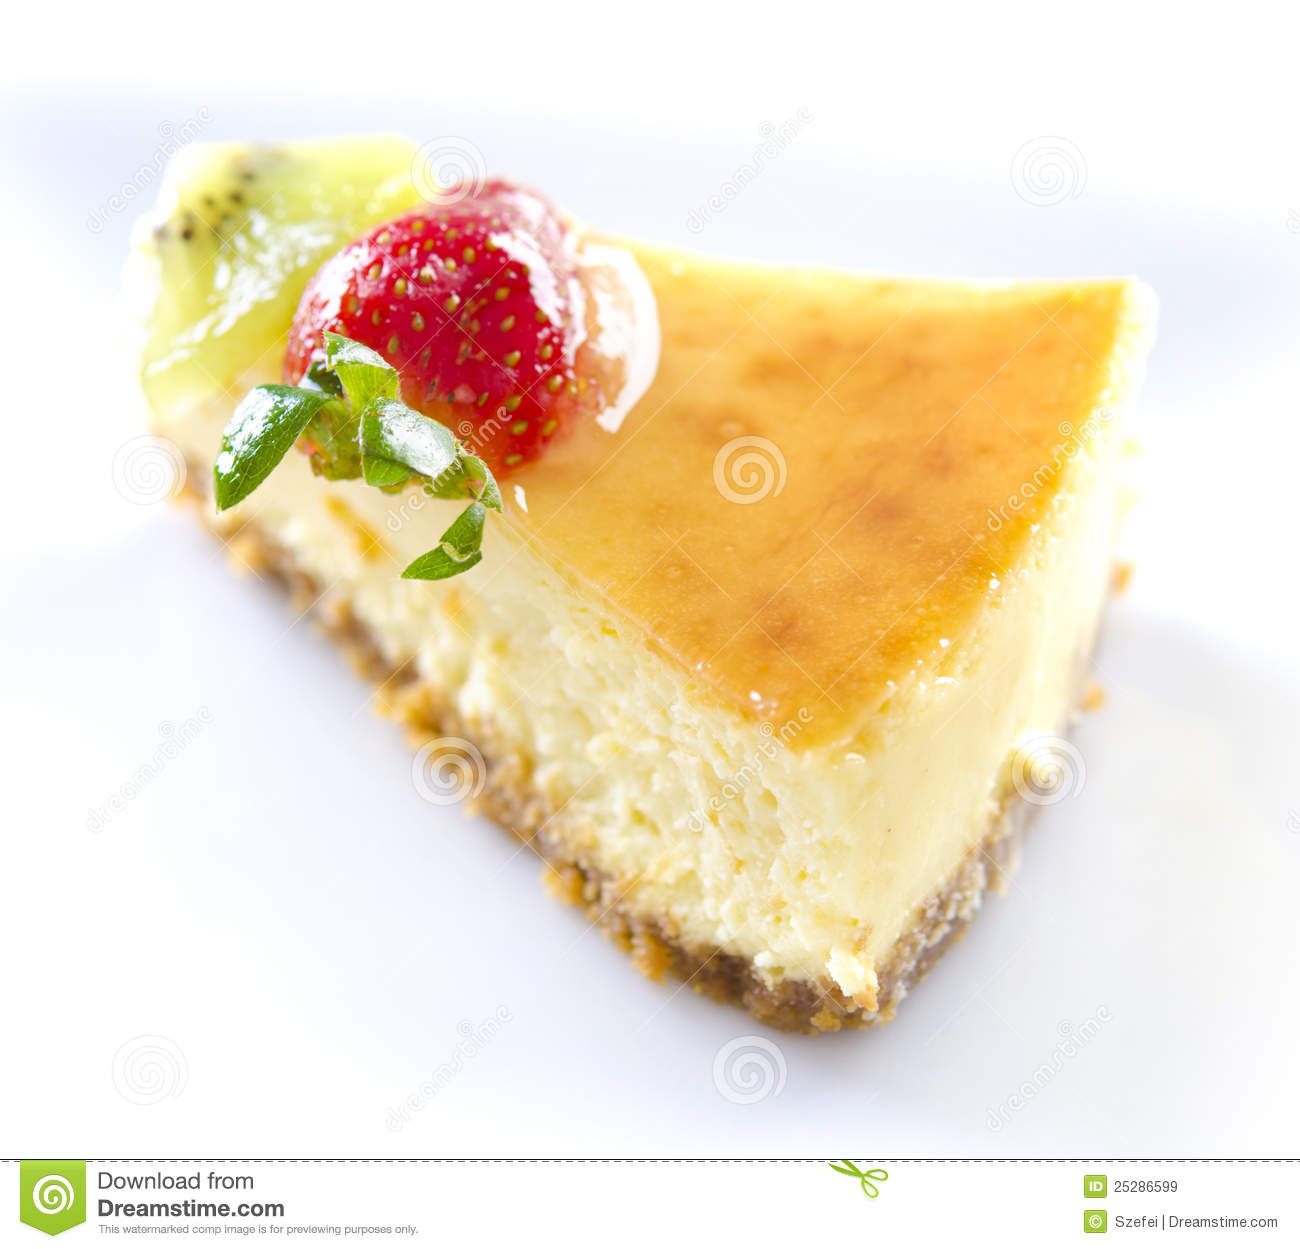 Passion Fruit Cheese Cake Slice Royalty Free Stock Images   Image